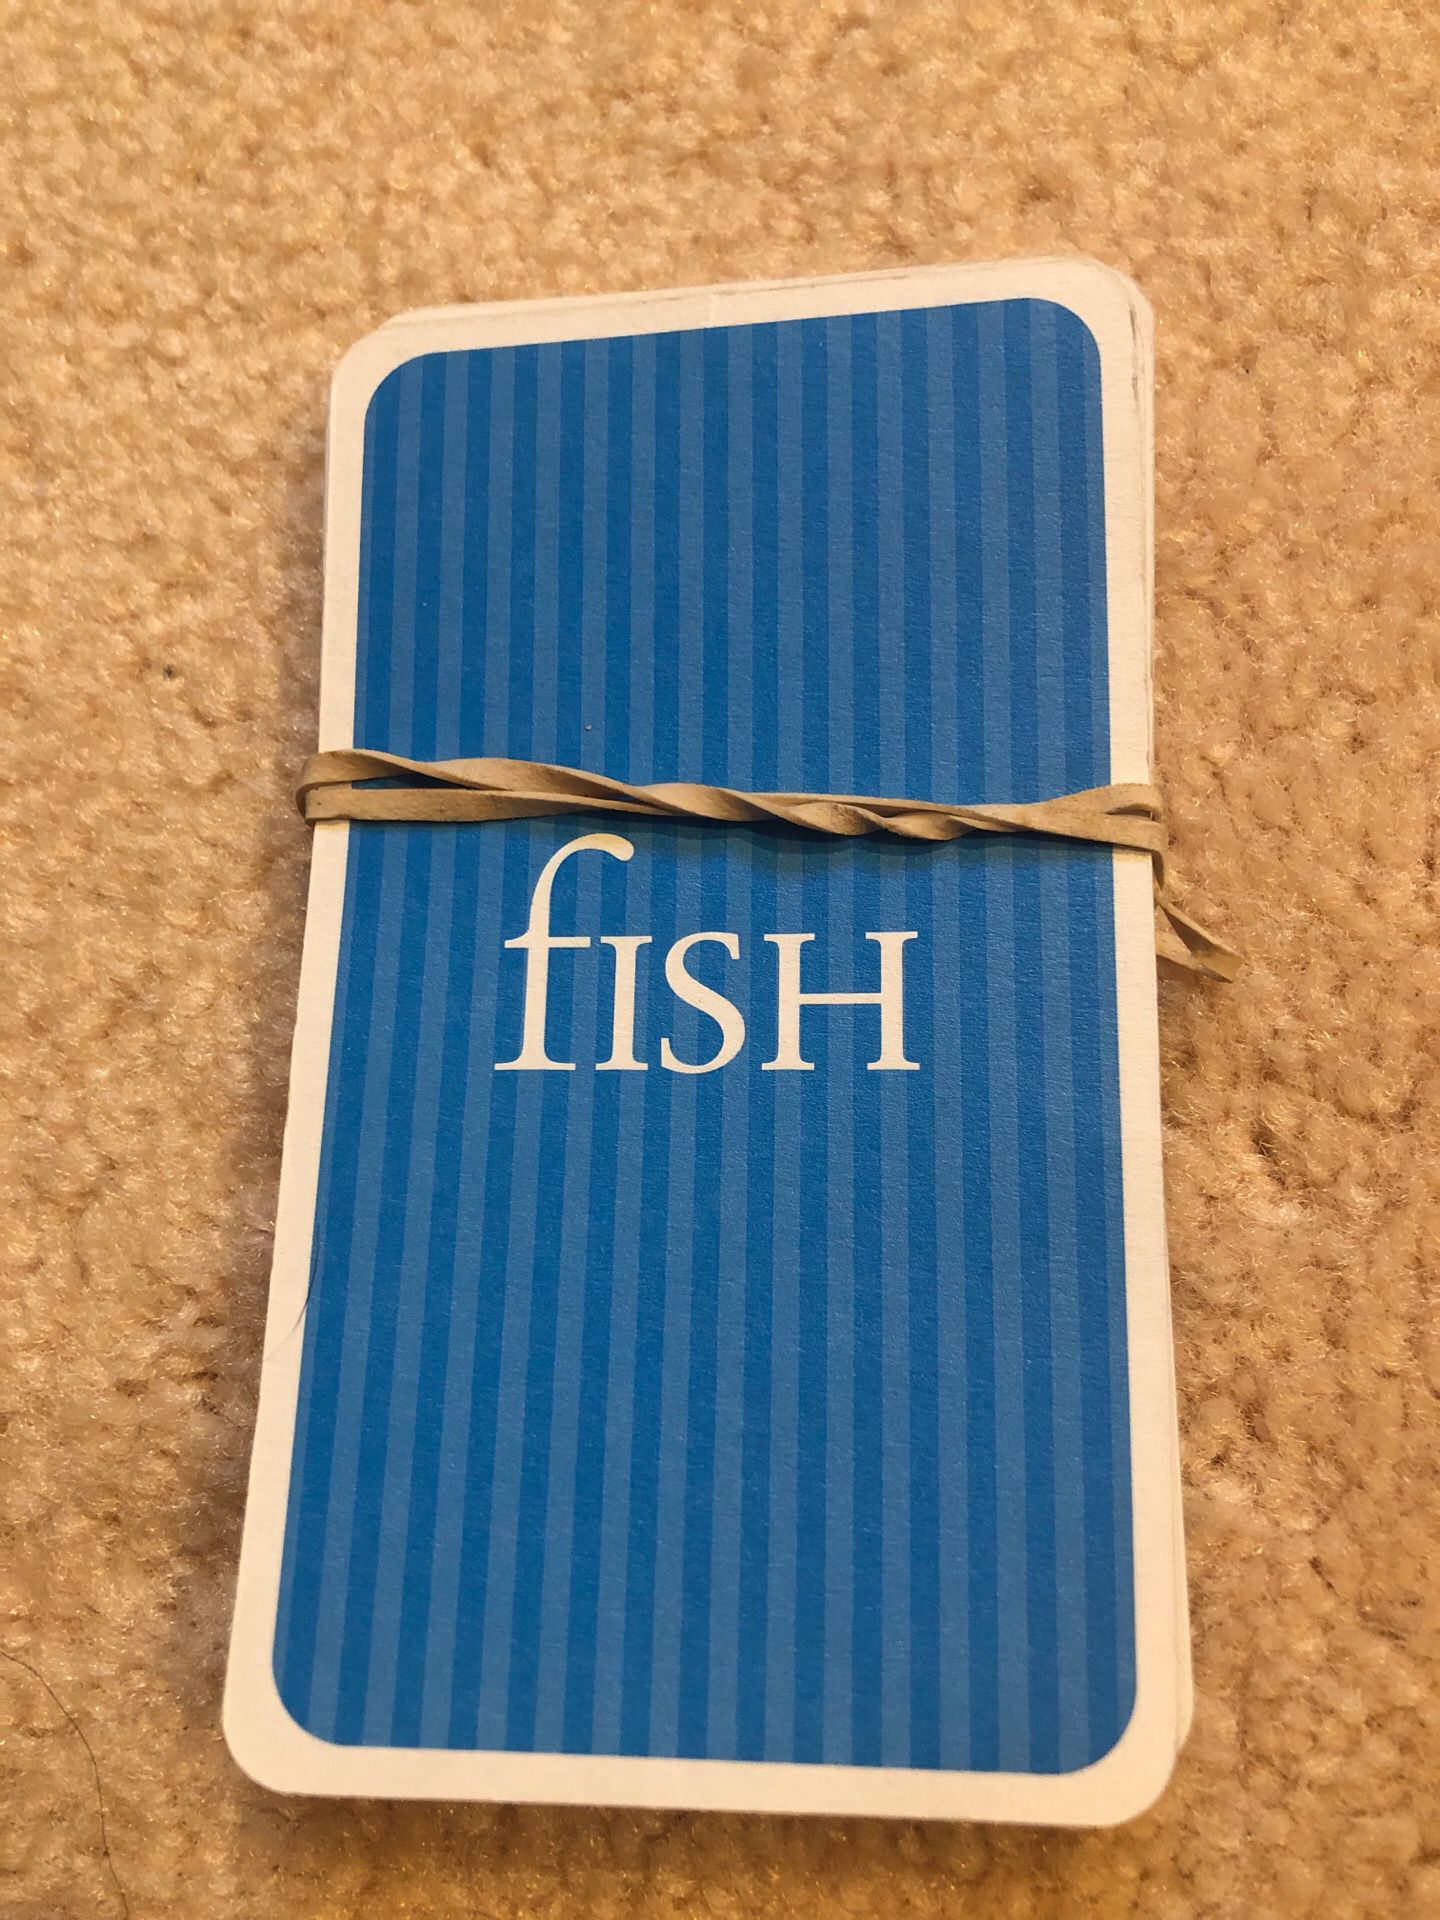 Go Fish card game